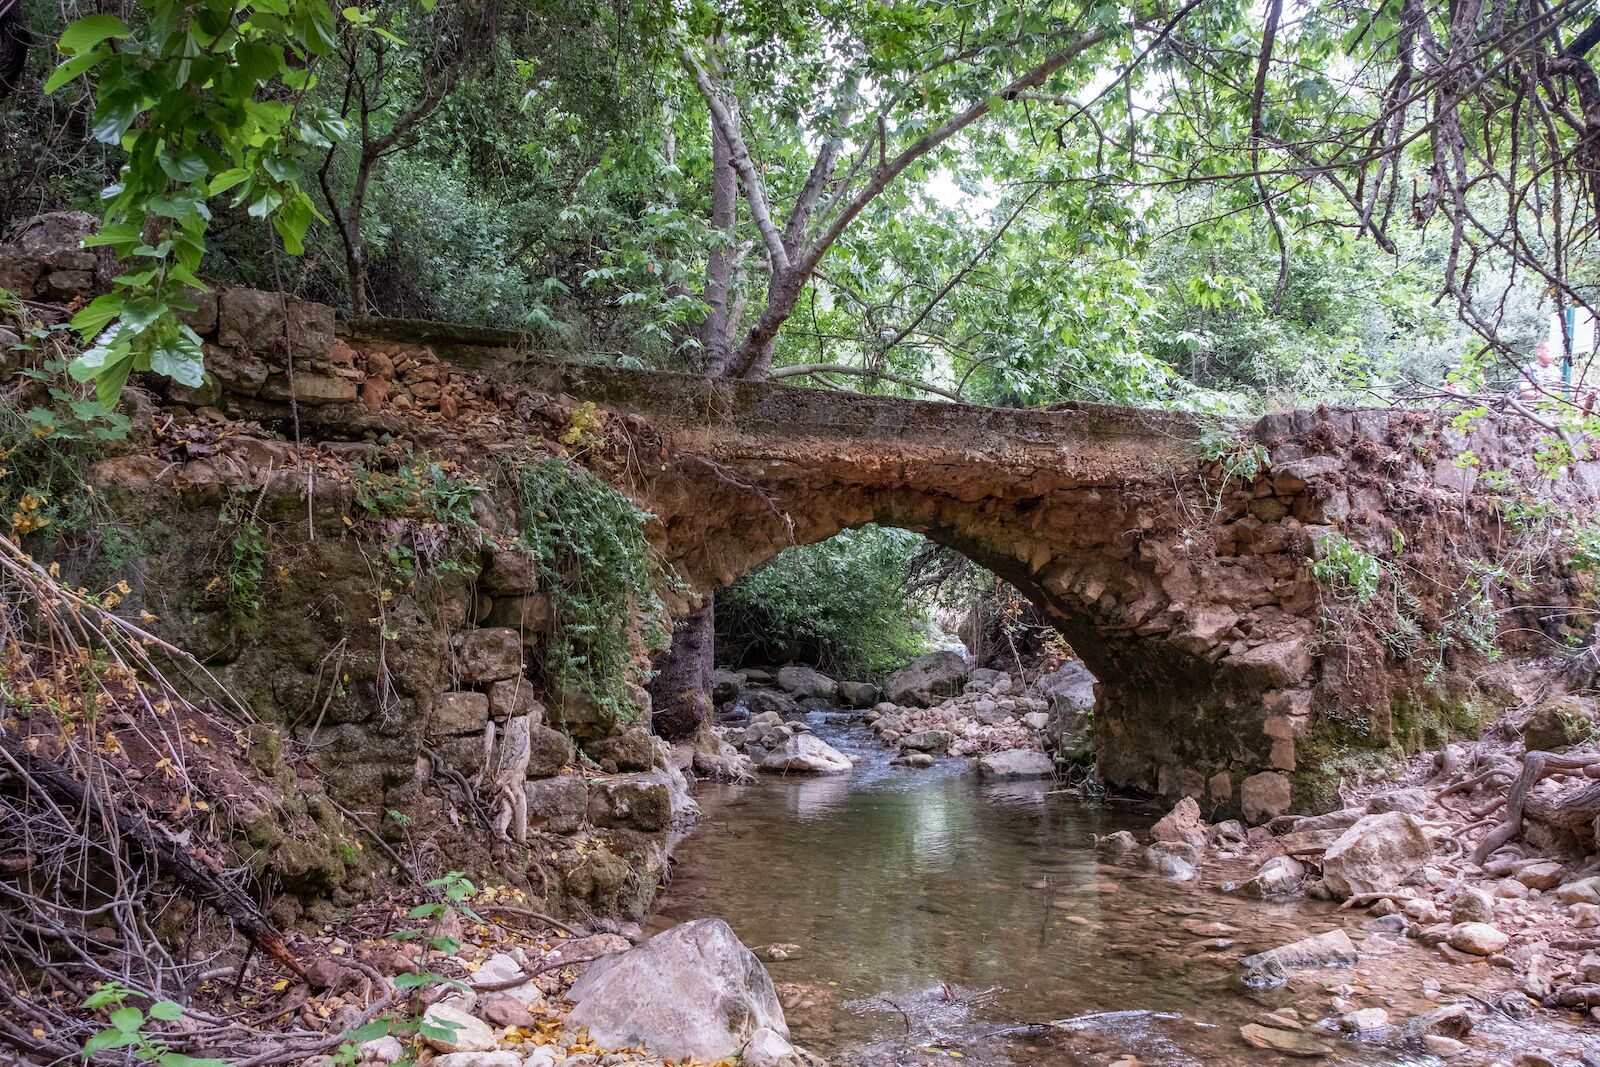 An antique bridge above Amud stream in the nature reserve Wadi Amud. The murmur of water and silence in the early morning in the natural reserve.